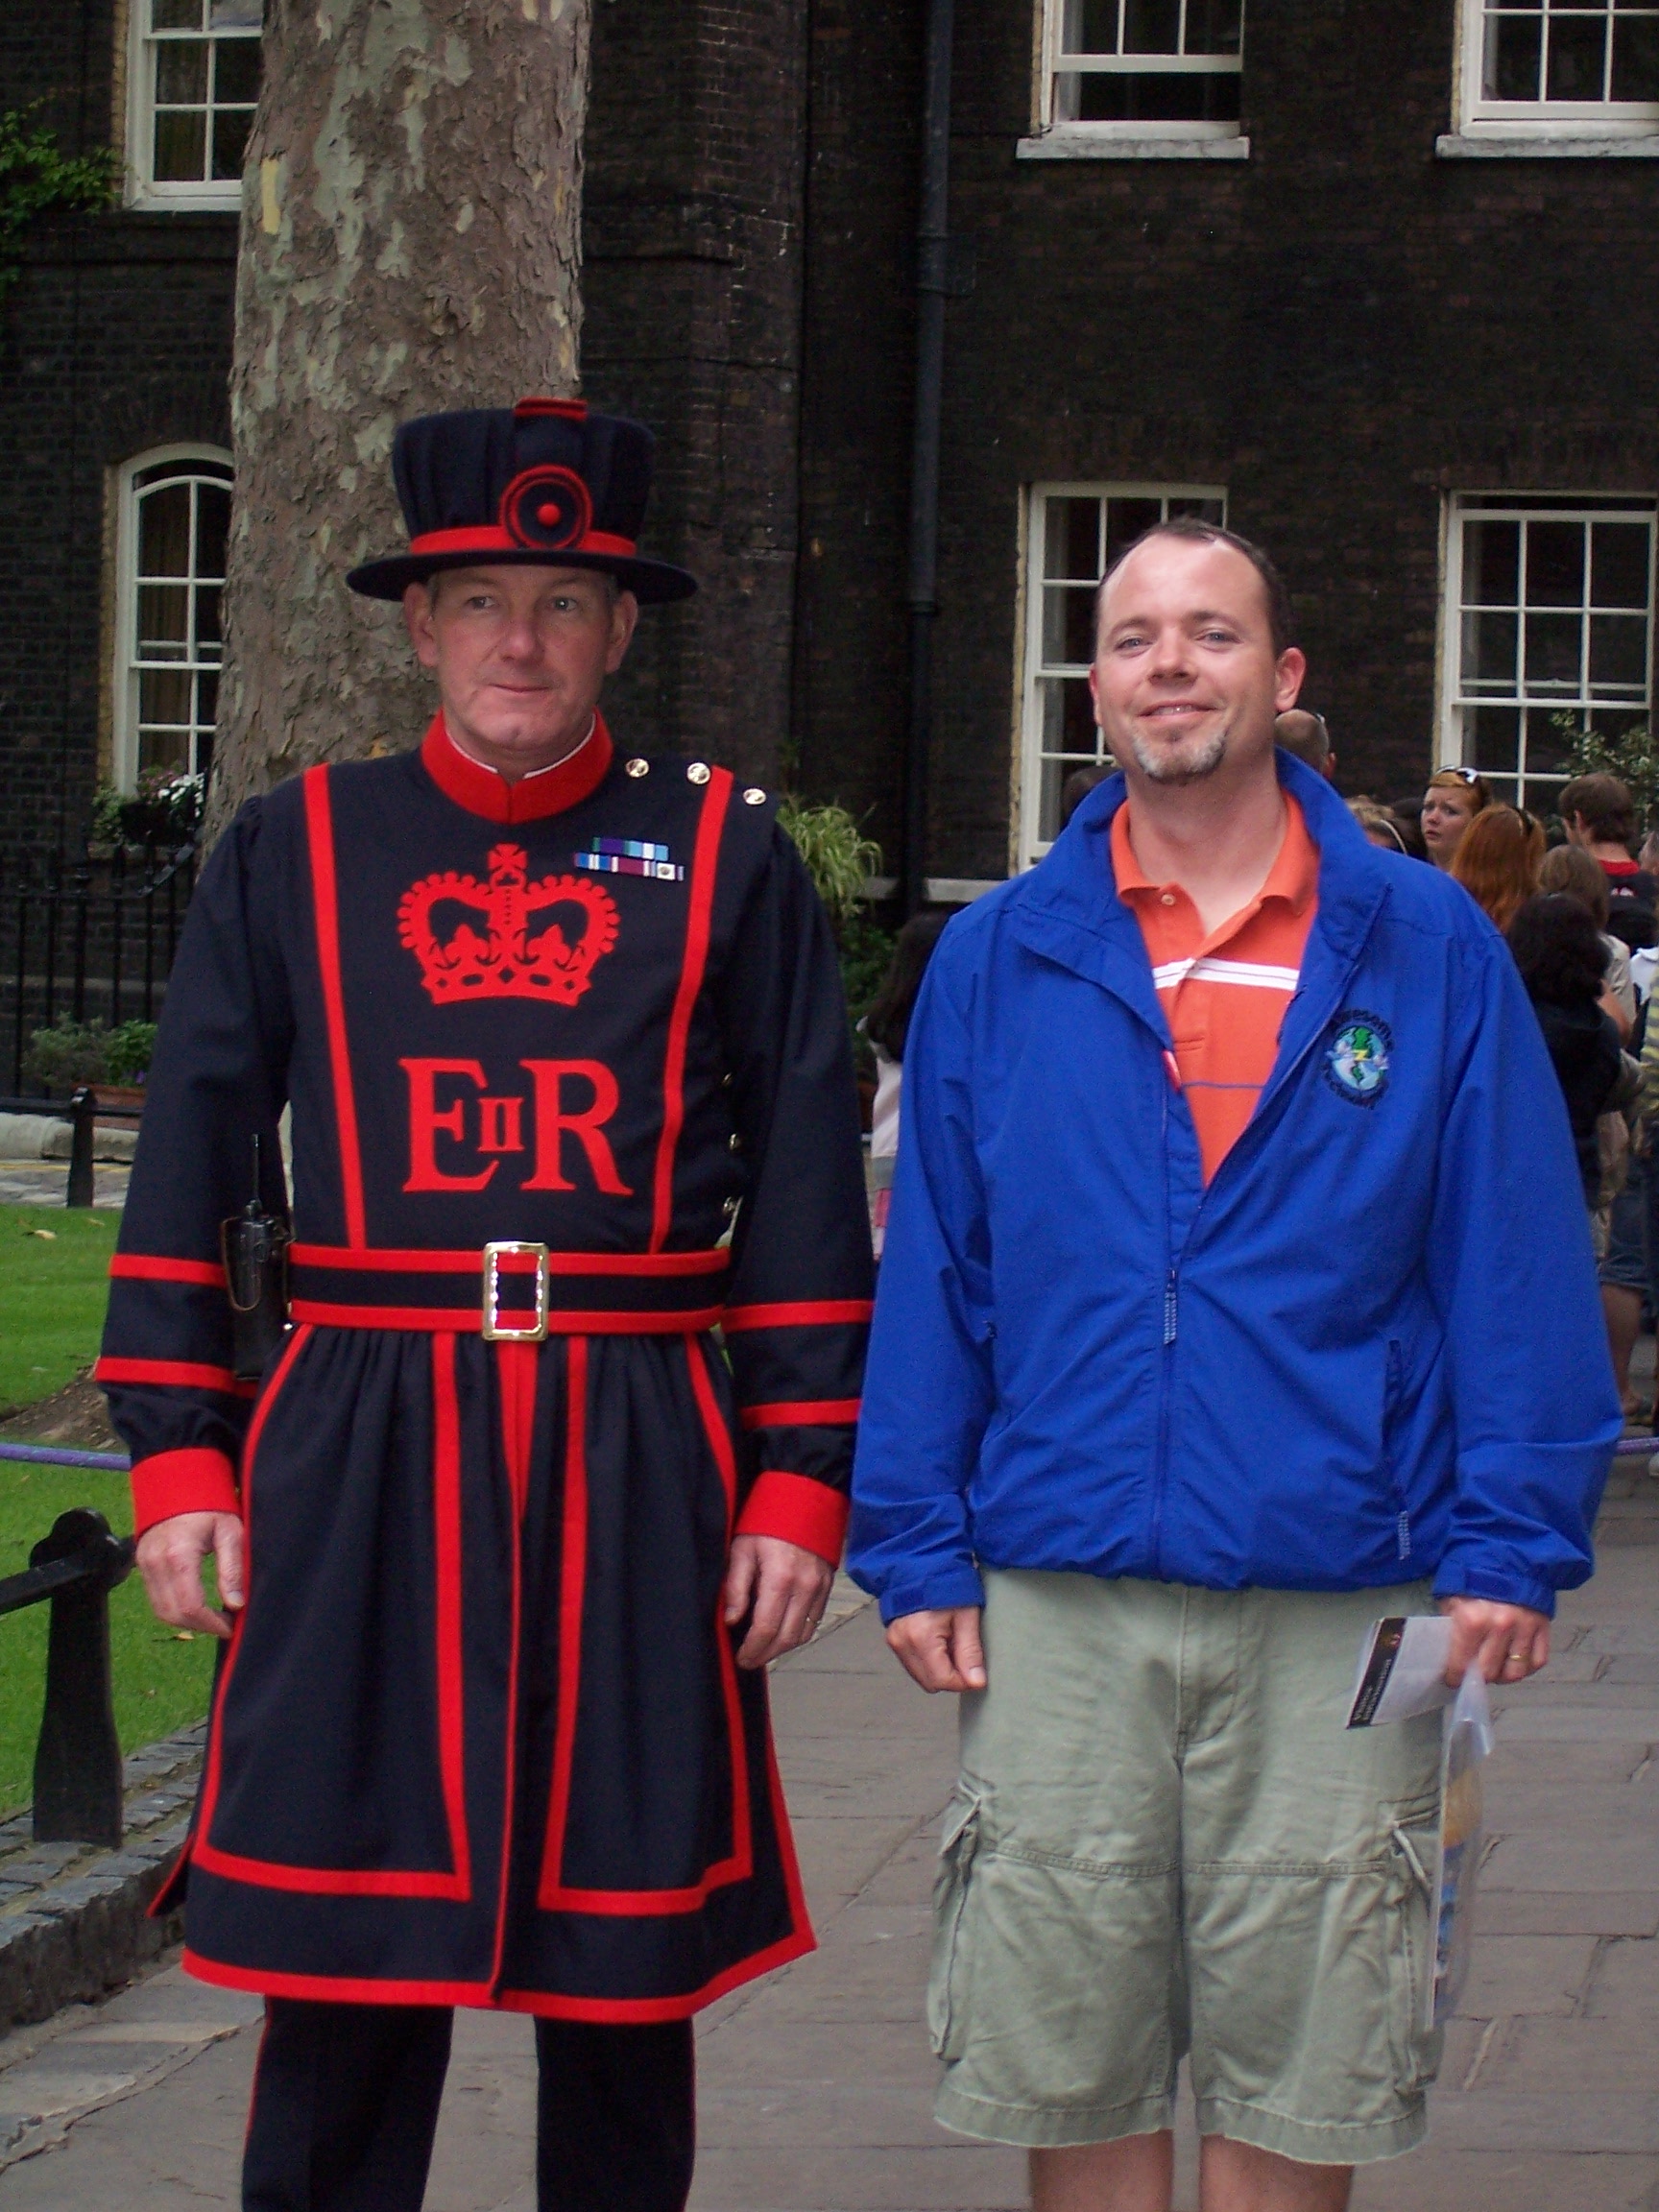 Henry and the BeefEater